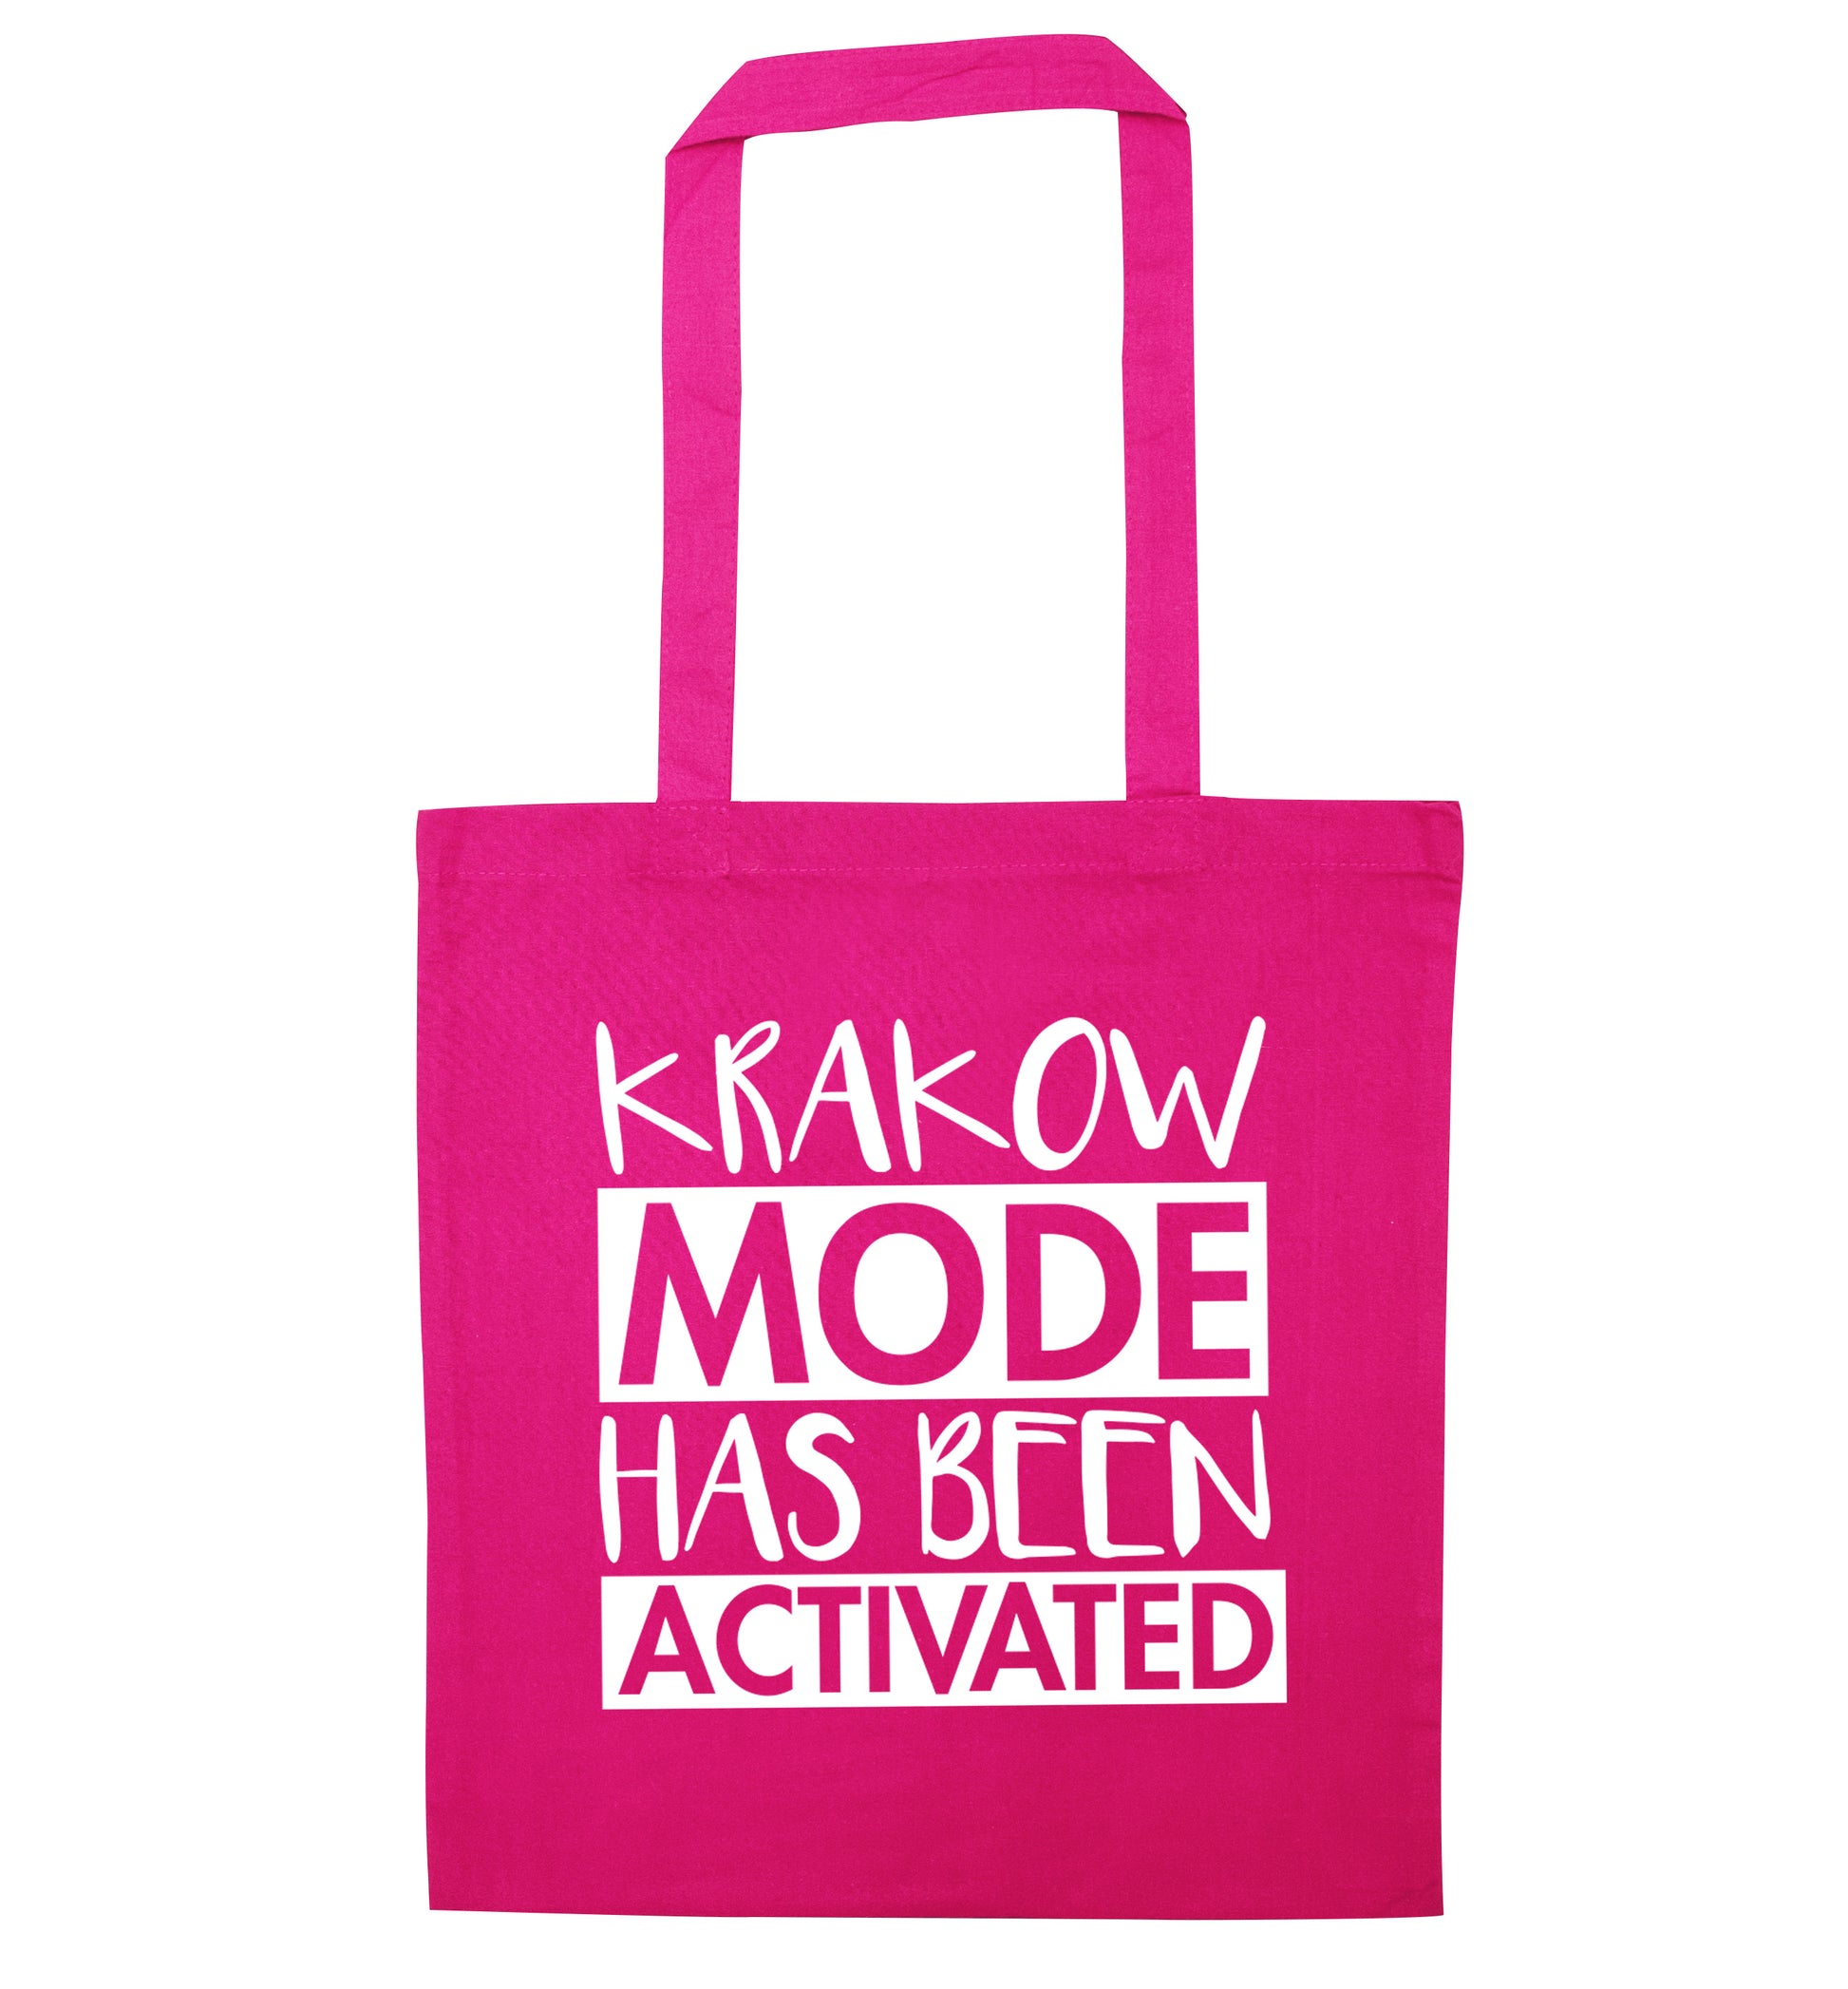 Krakow mode has been activated pink tote bag